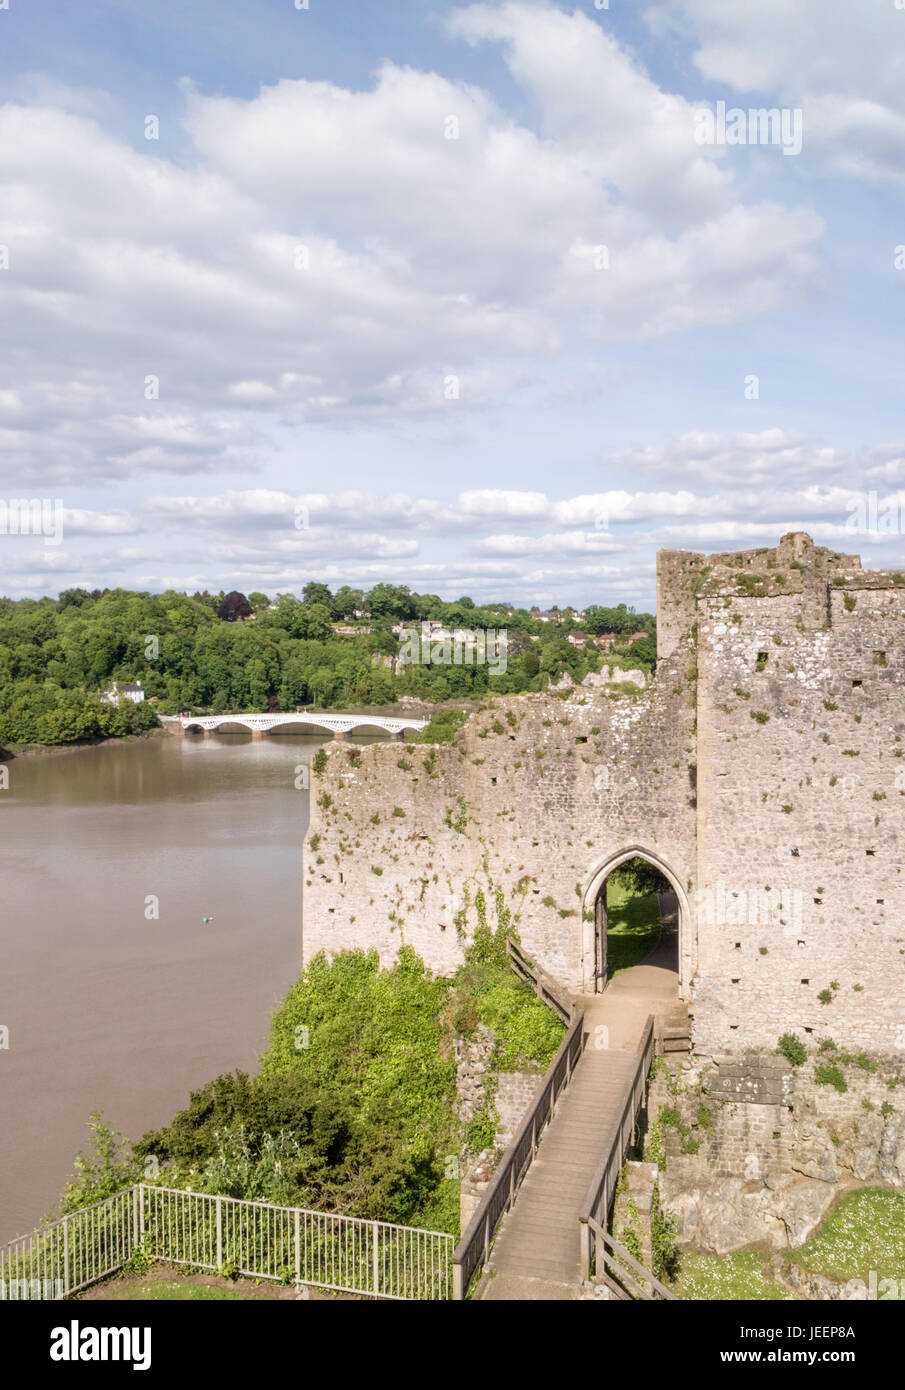 Chepstow Castle overlooking the River Wye, Chepstow, Monmouthshire, Wales, UK Stock Photo